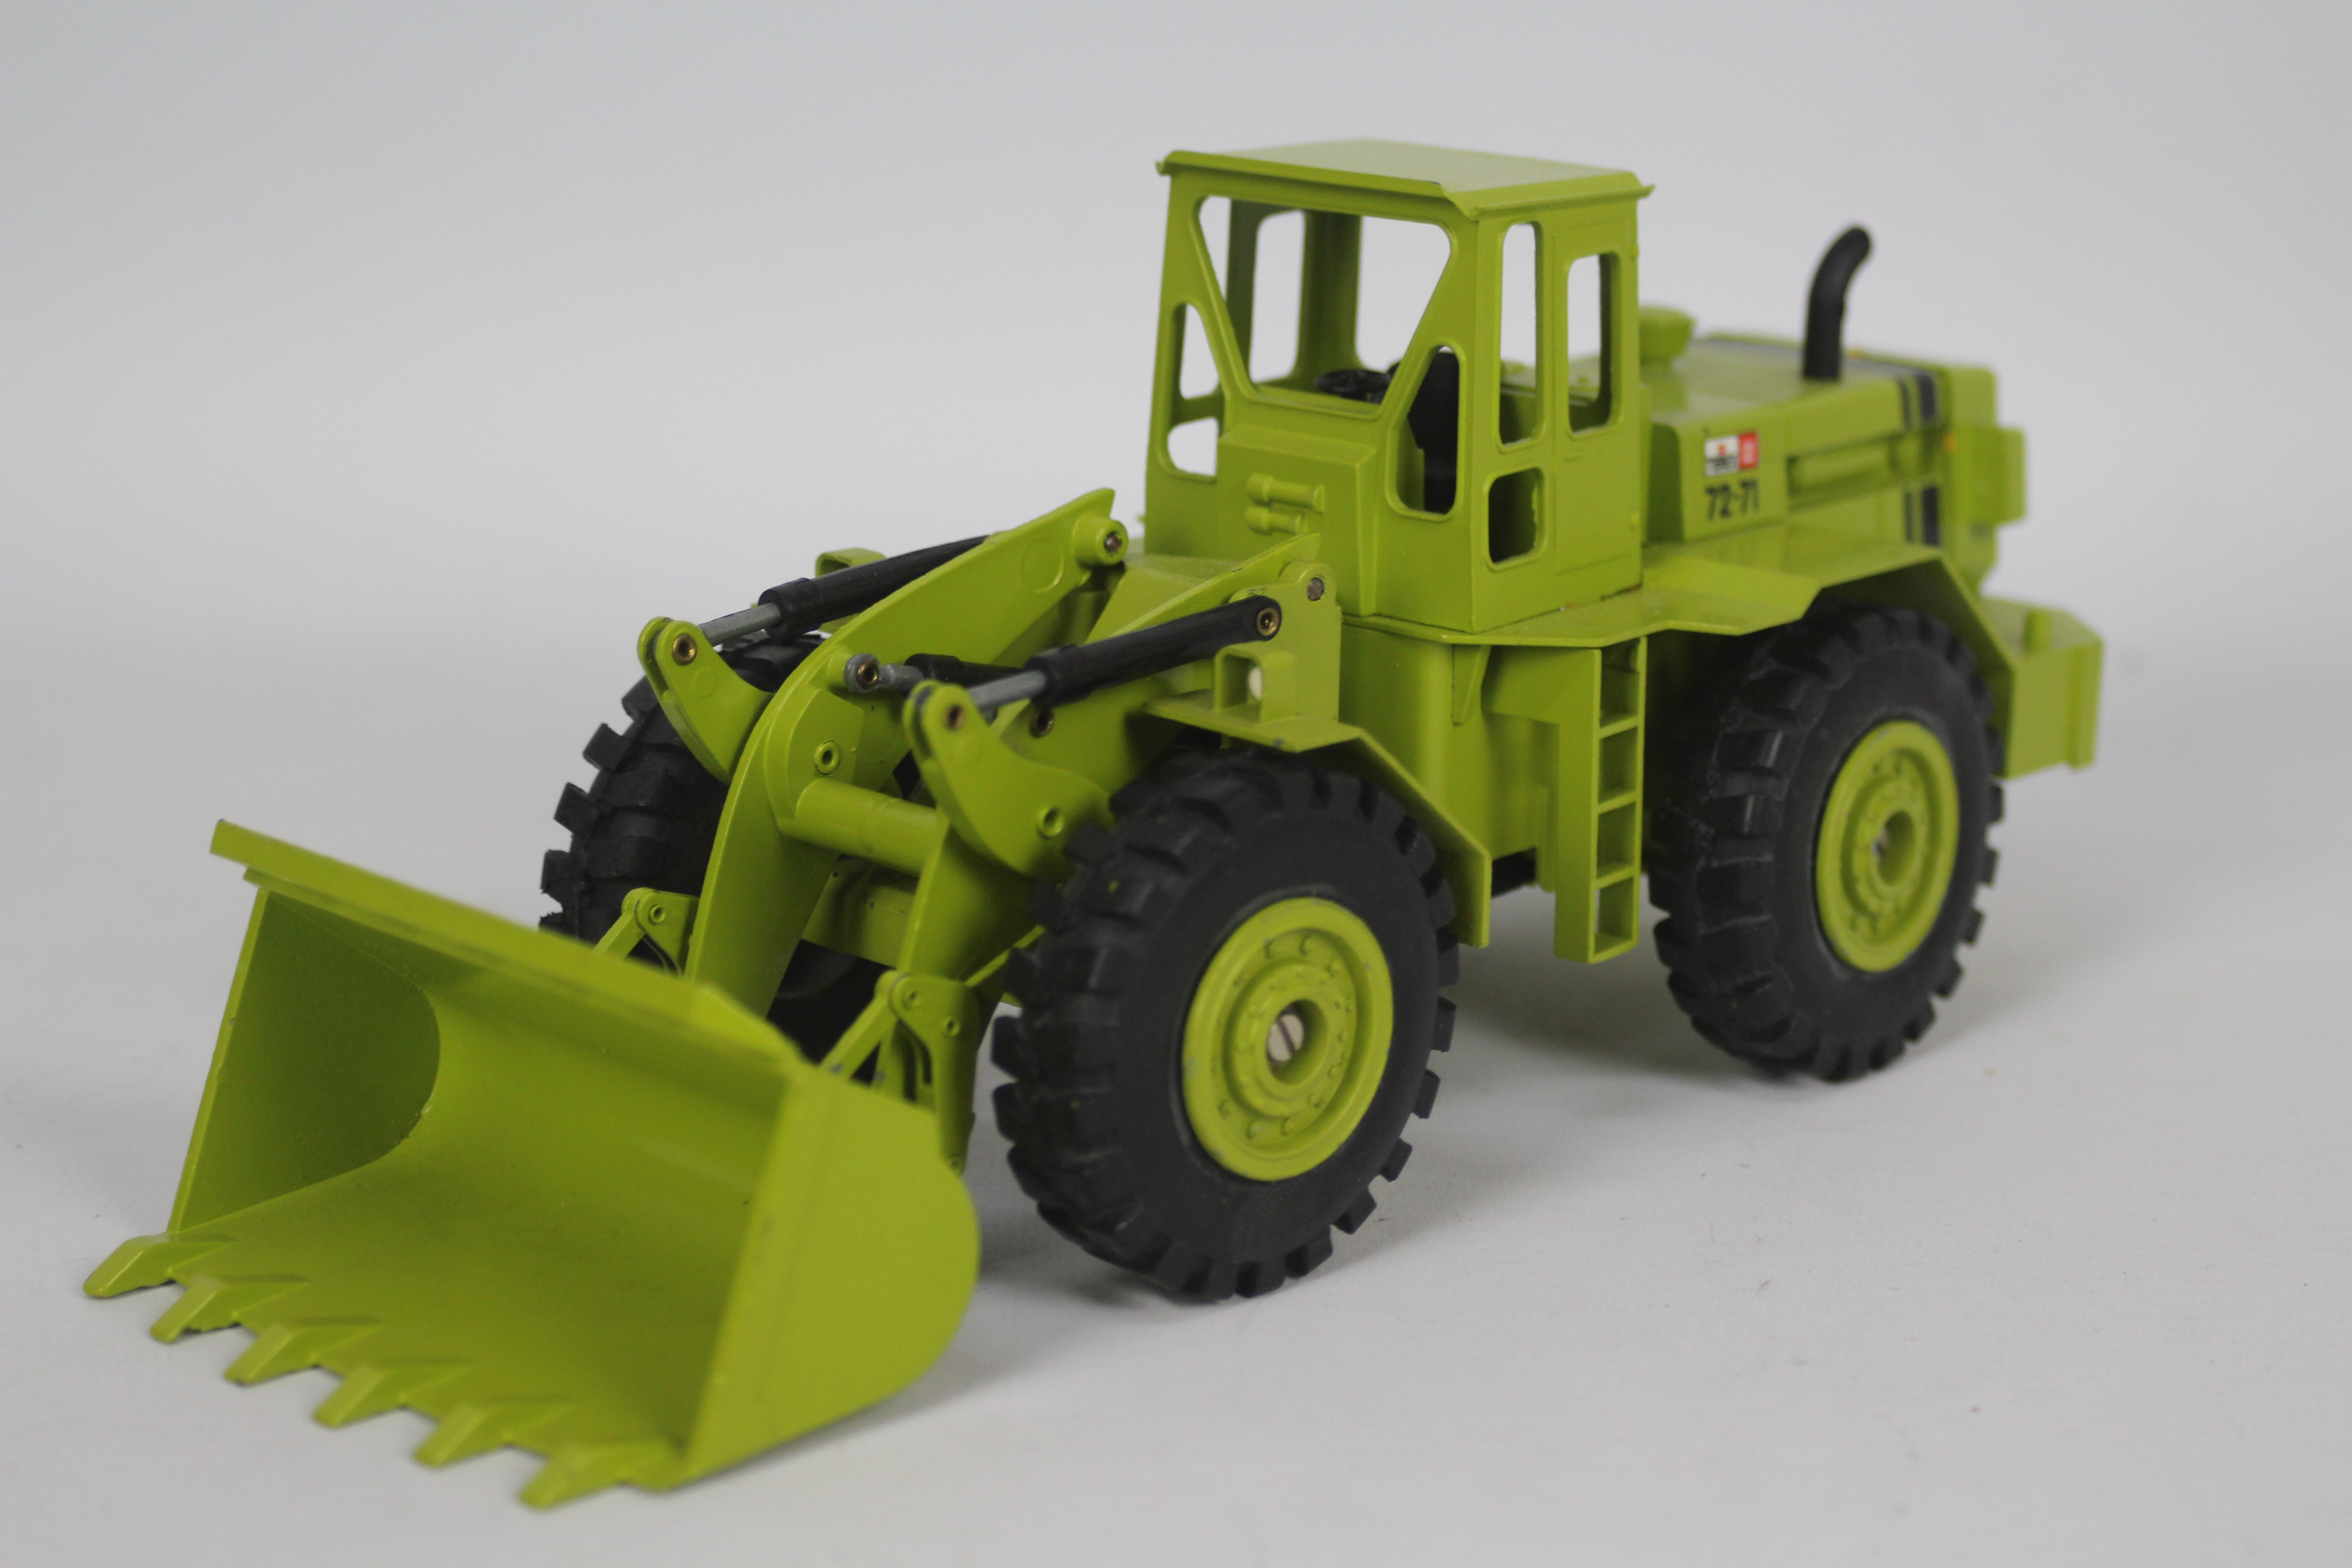 Gescha - A boxed GM Terex 72.71 Loader in green. # 410. - Image 3 of 4